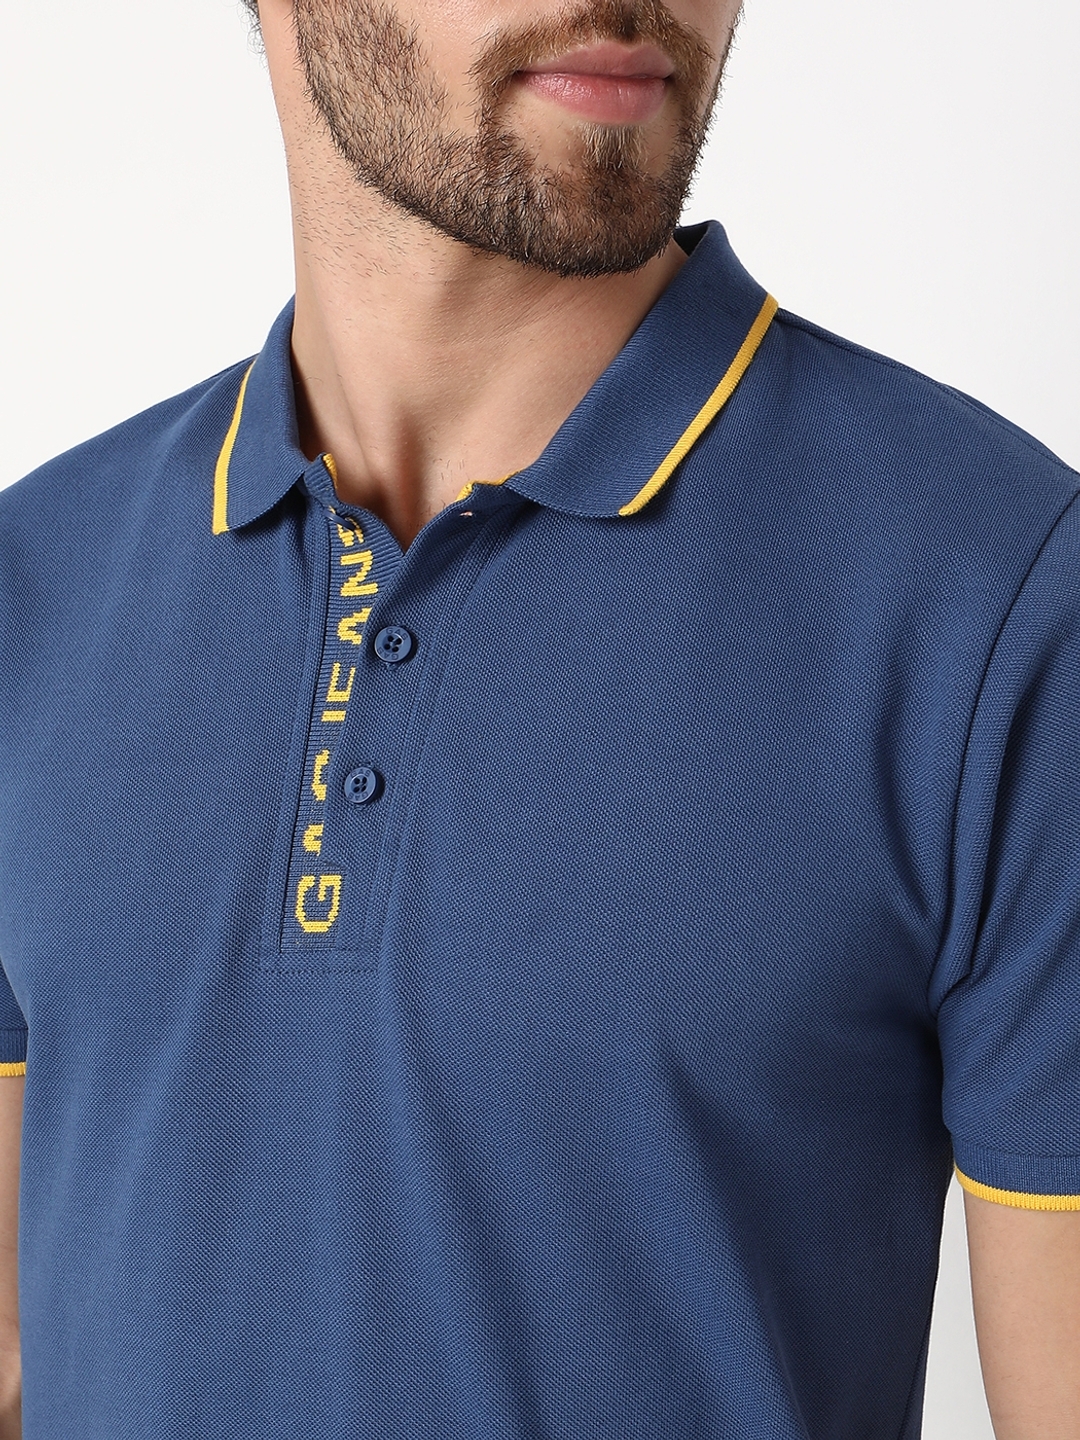 Regular Fit Half Sleeve Solid Cotton Polo T-Shirt